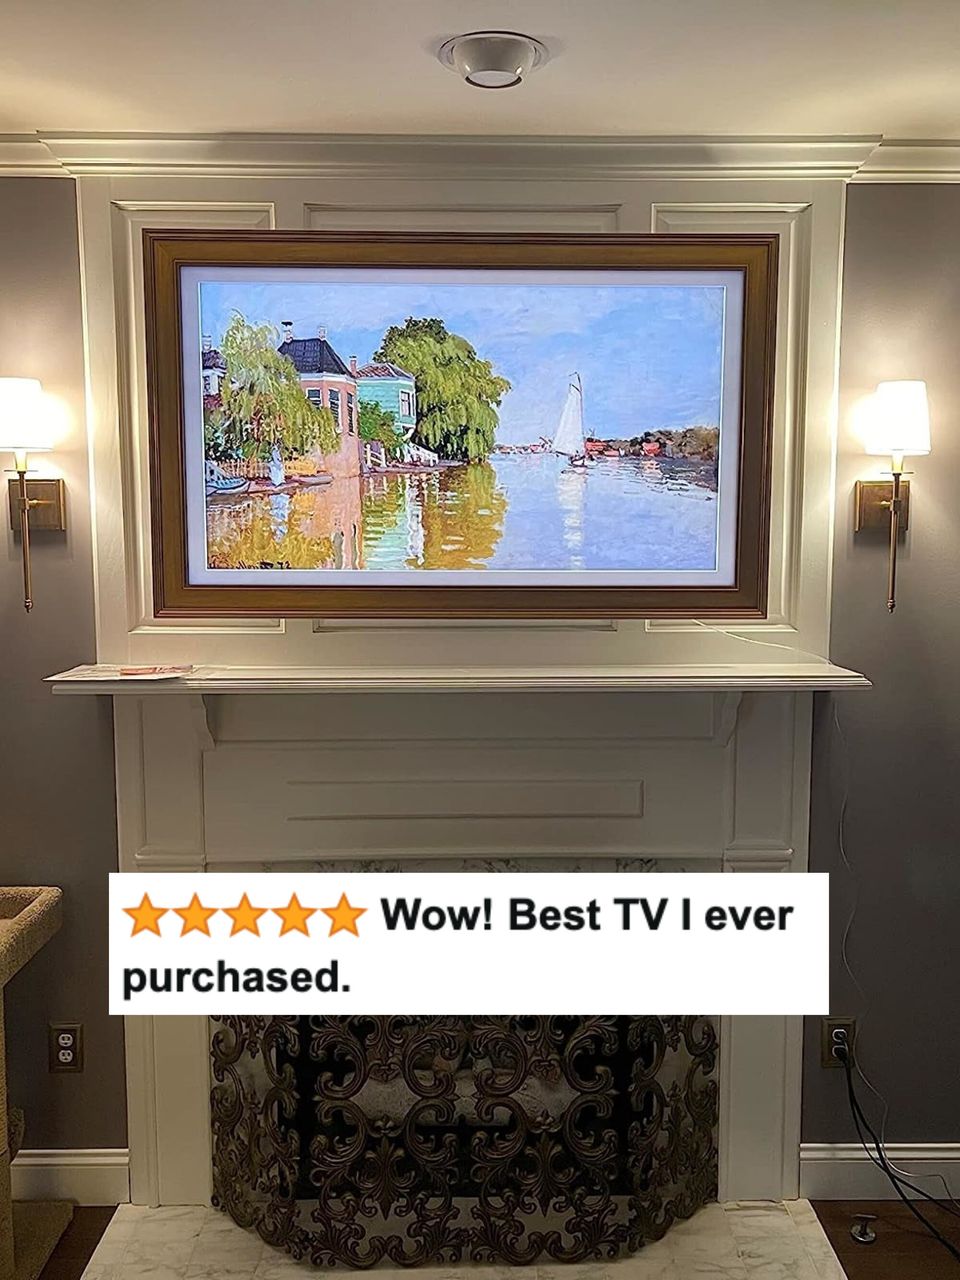 34% off the Samsung Frame TV — making it the cheapest it's ever been! I